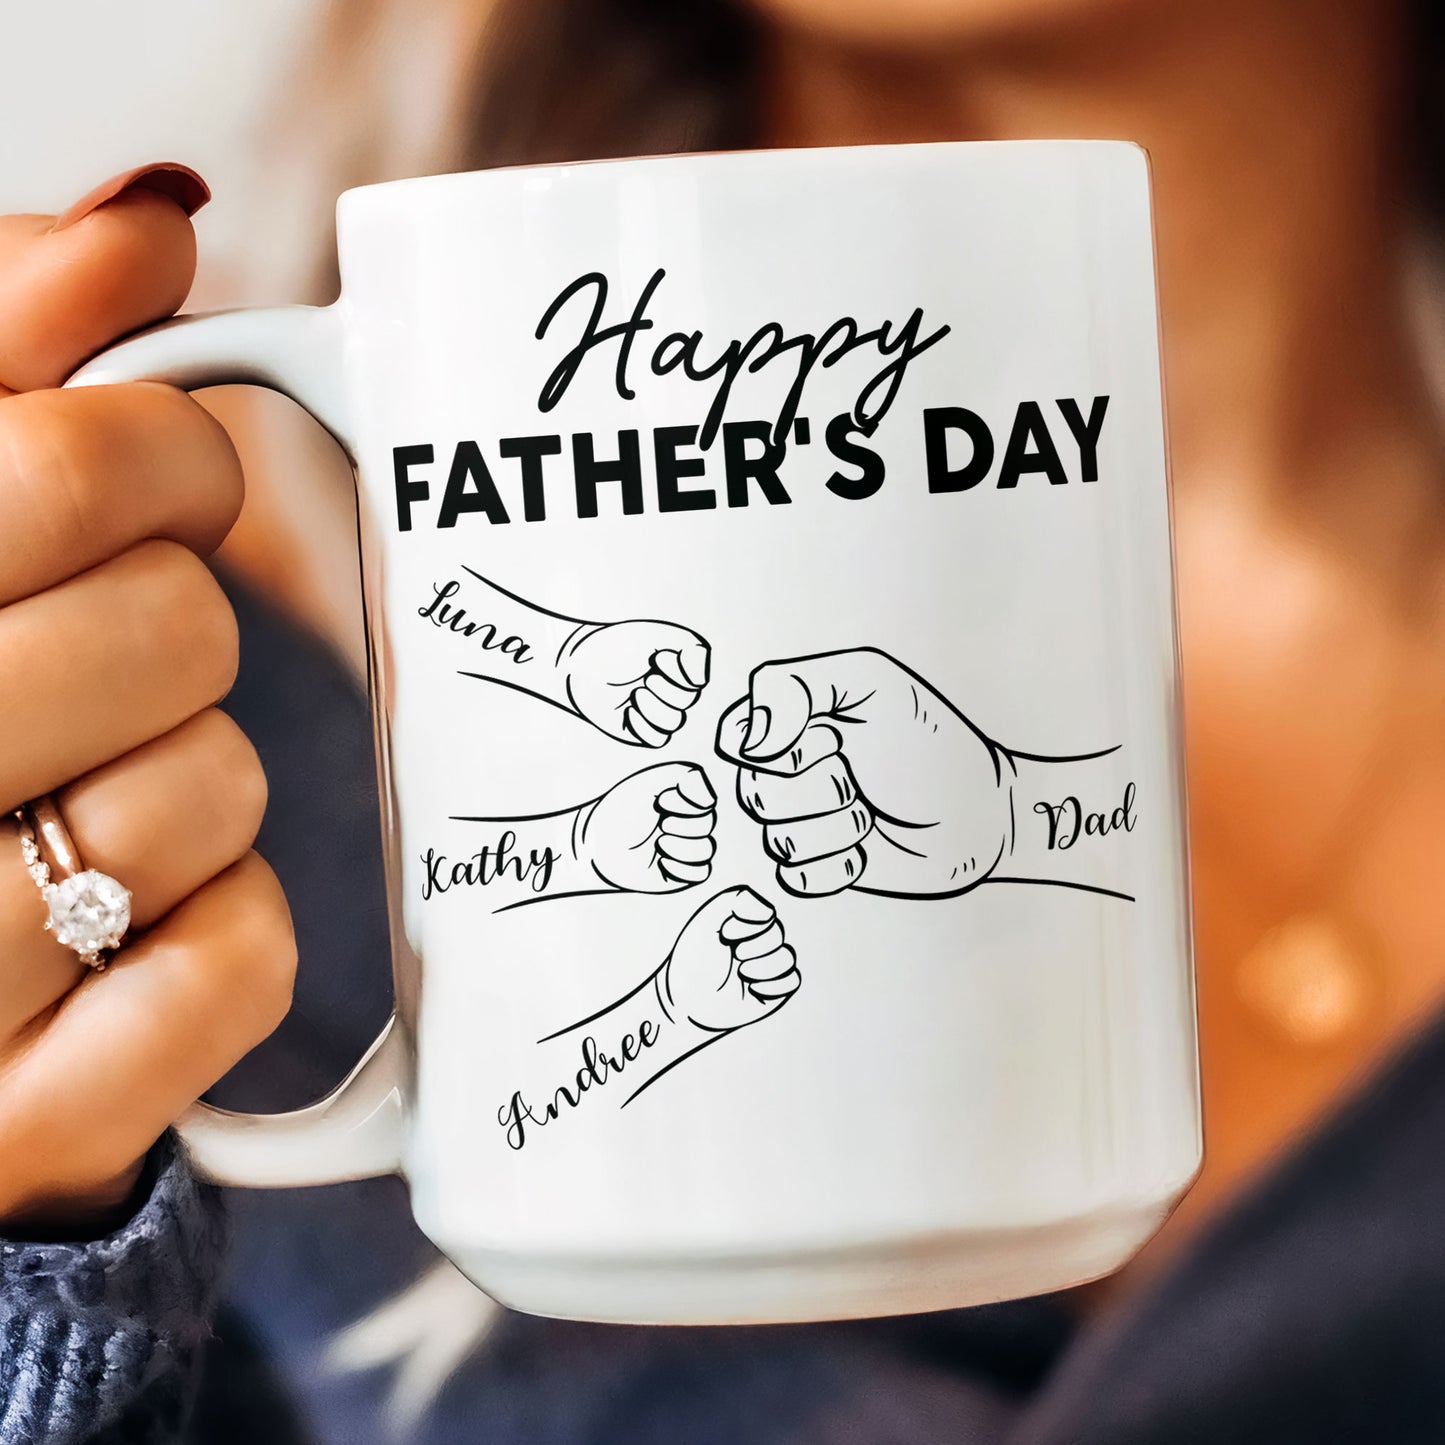 Custom Name Dad Nutrition Facts Hand Bump Happy Father's Day - Personalized Mug